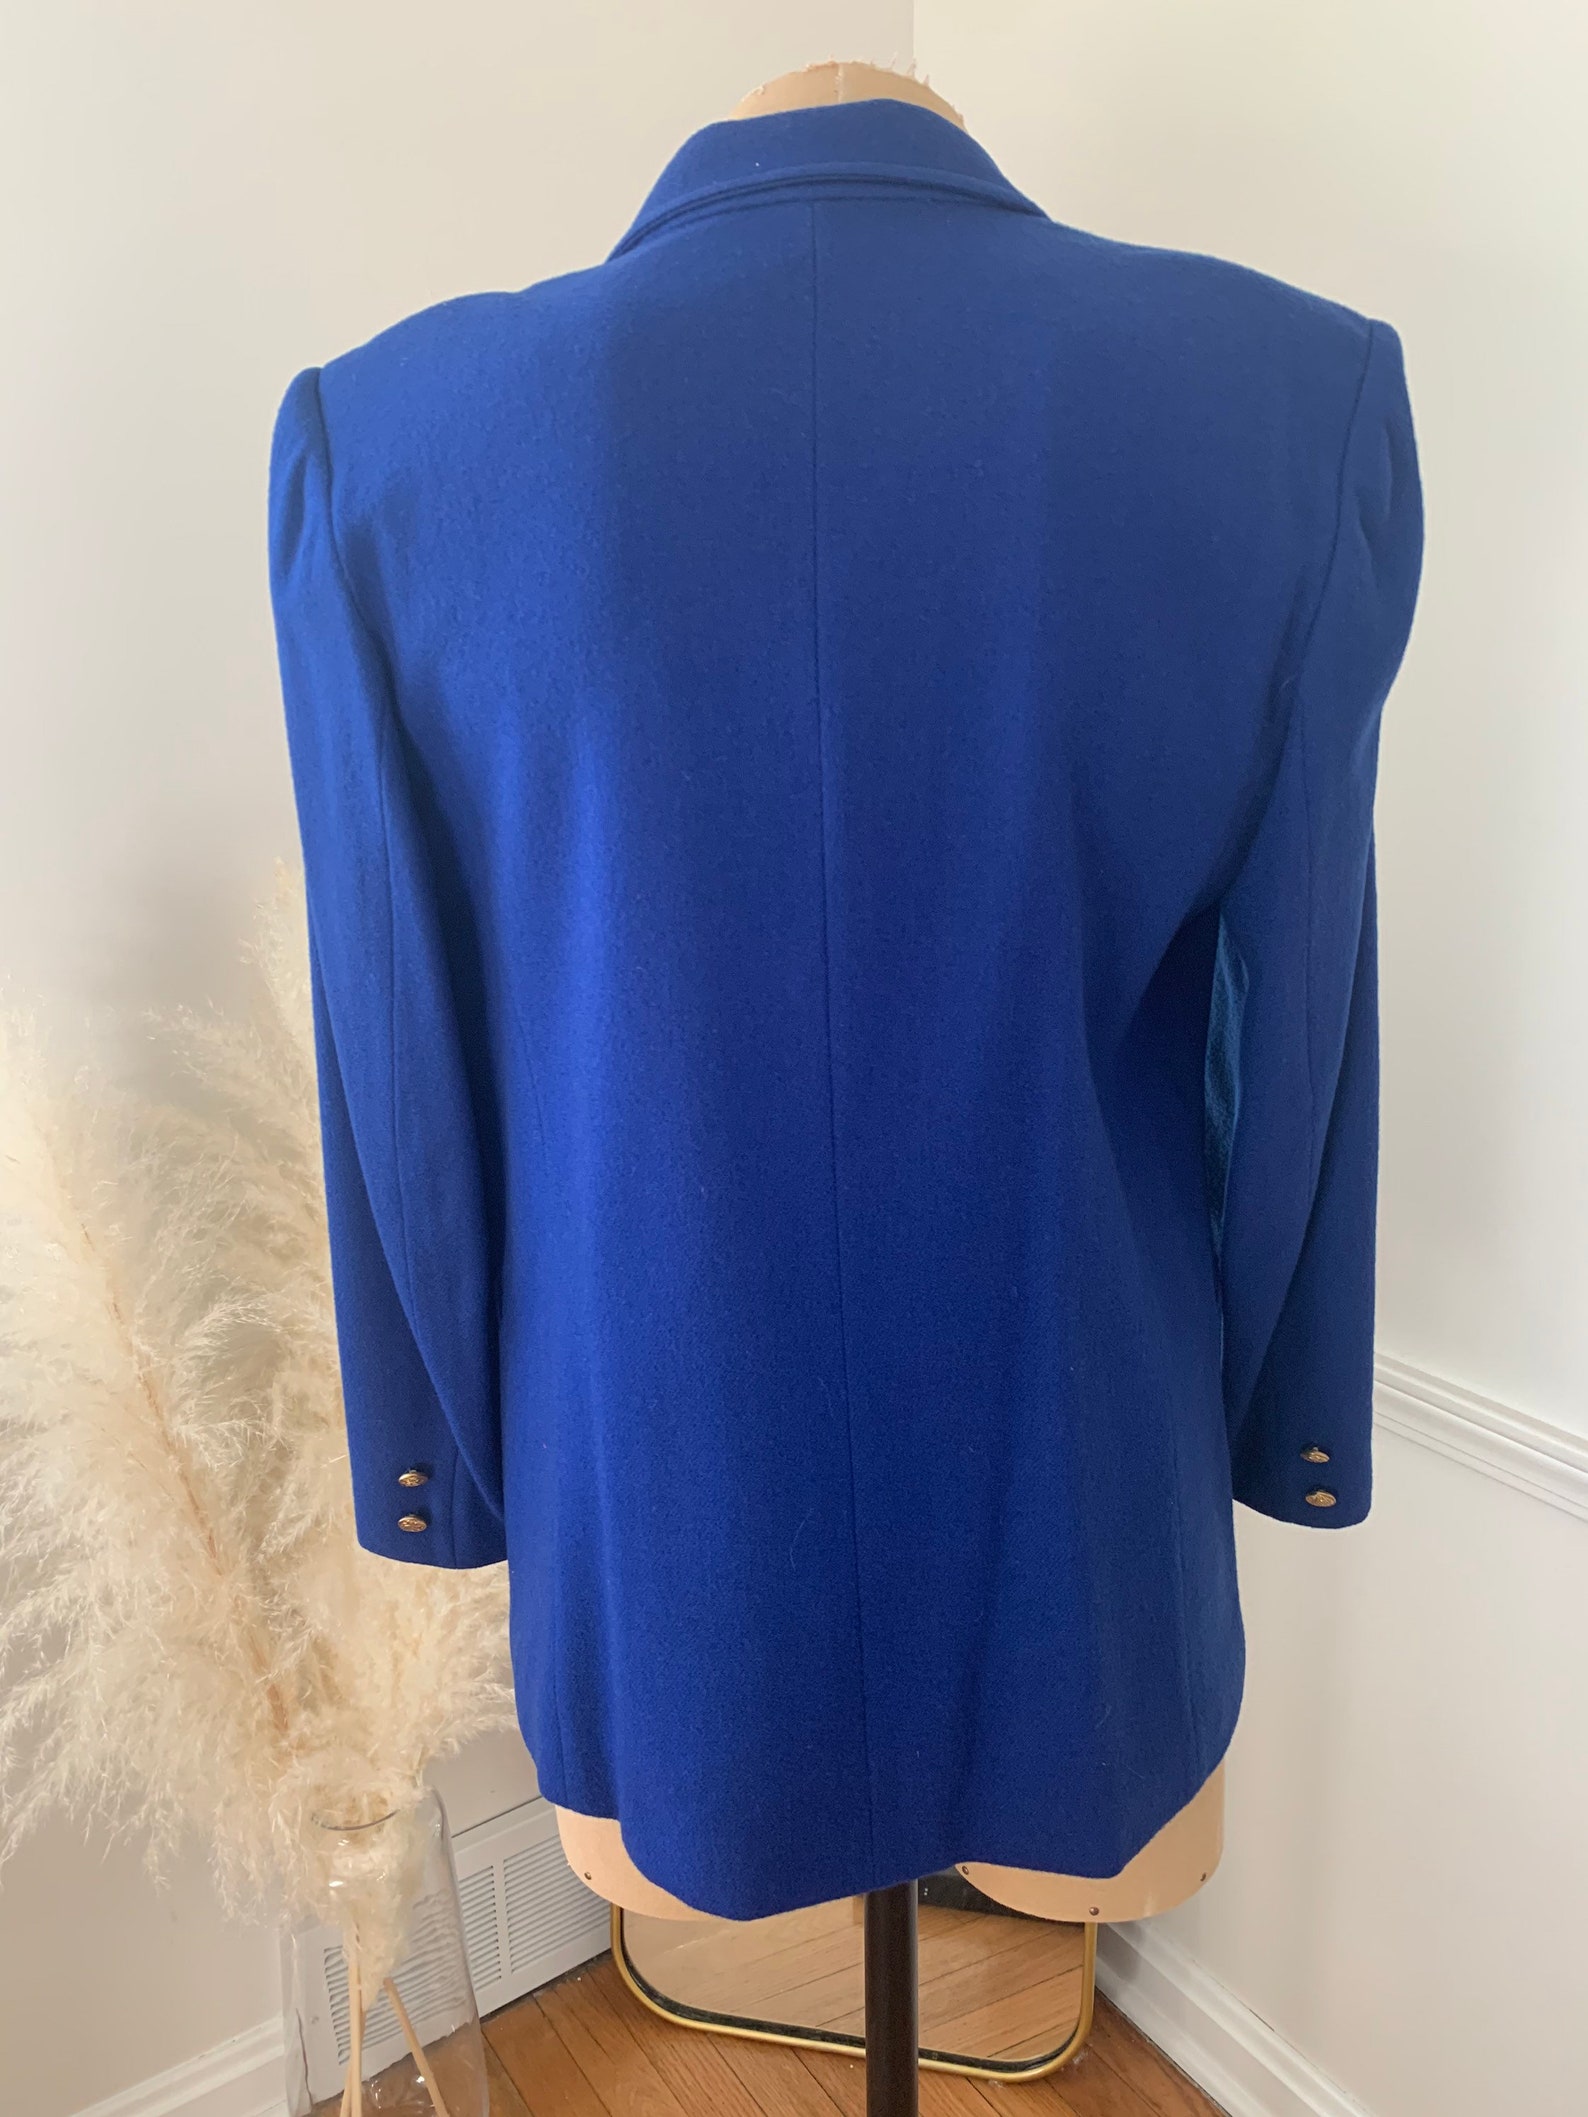 Womens Cobalt blue vintage blazer with gold buttons 100% | Etsy